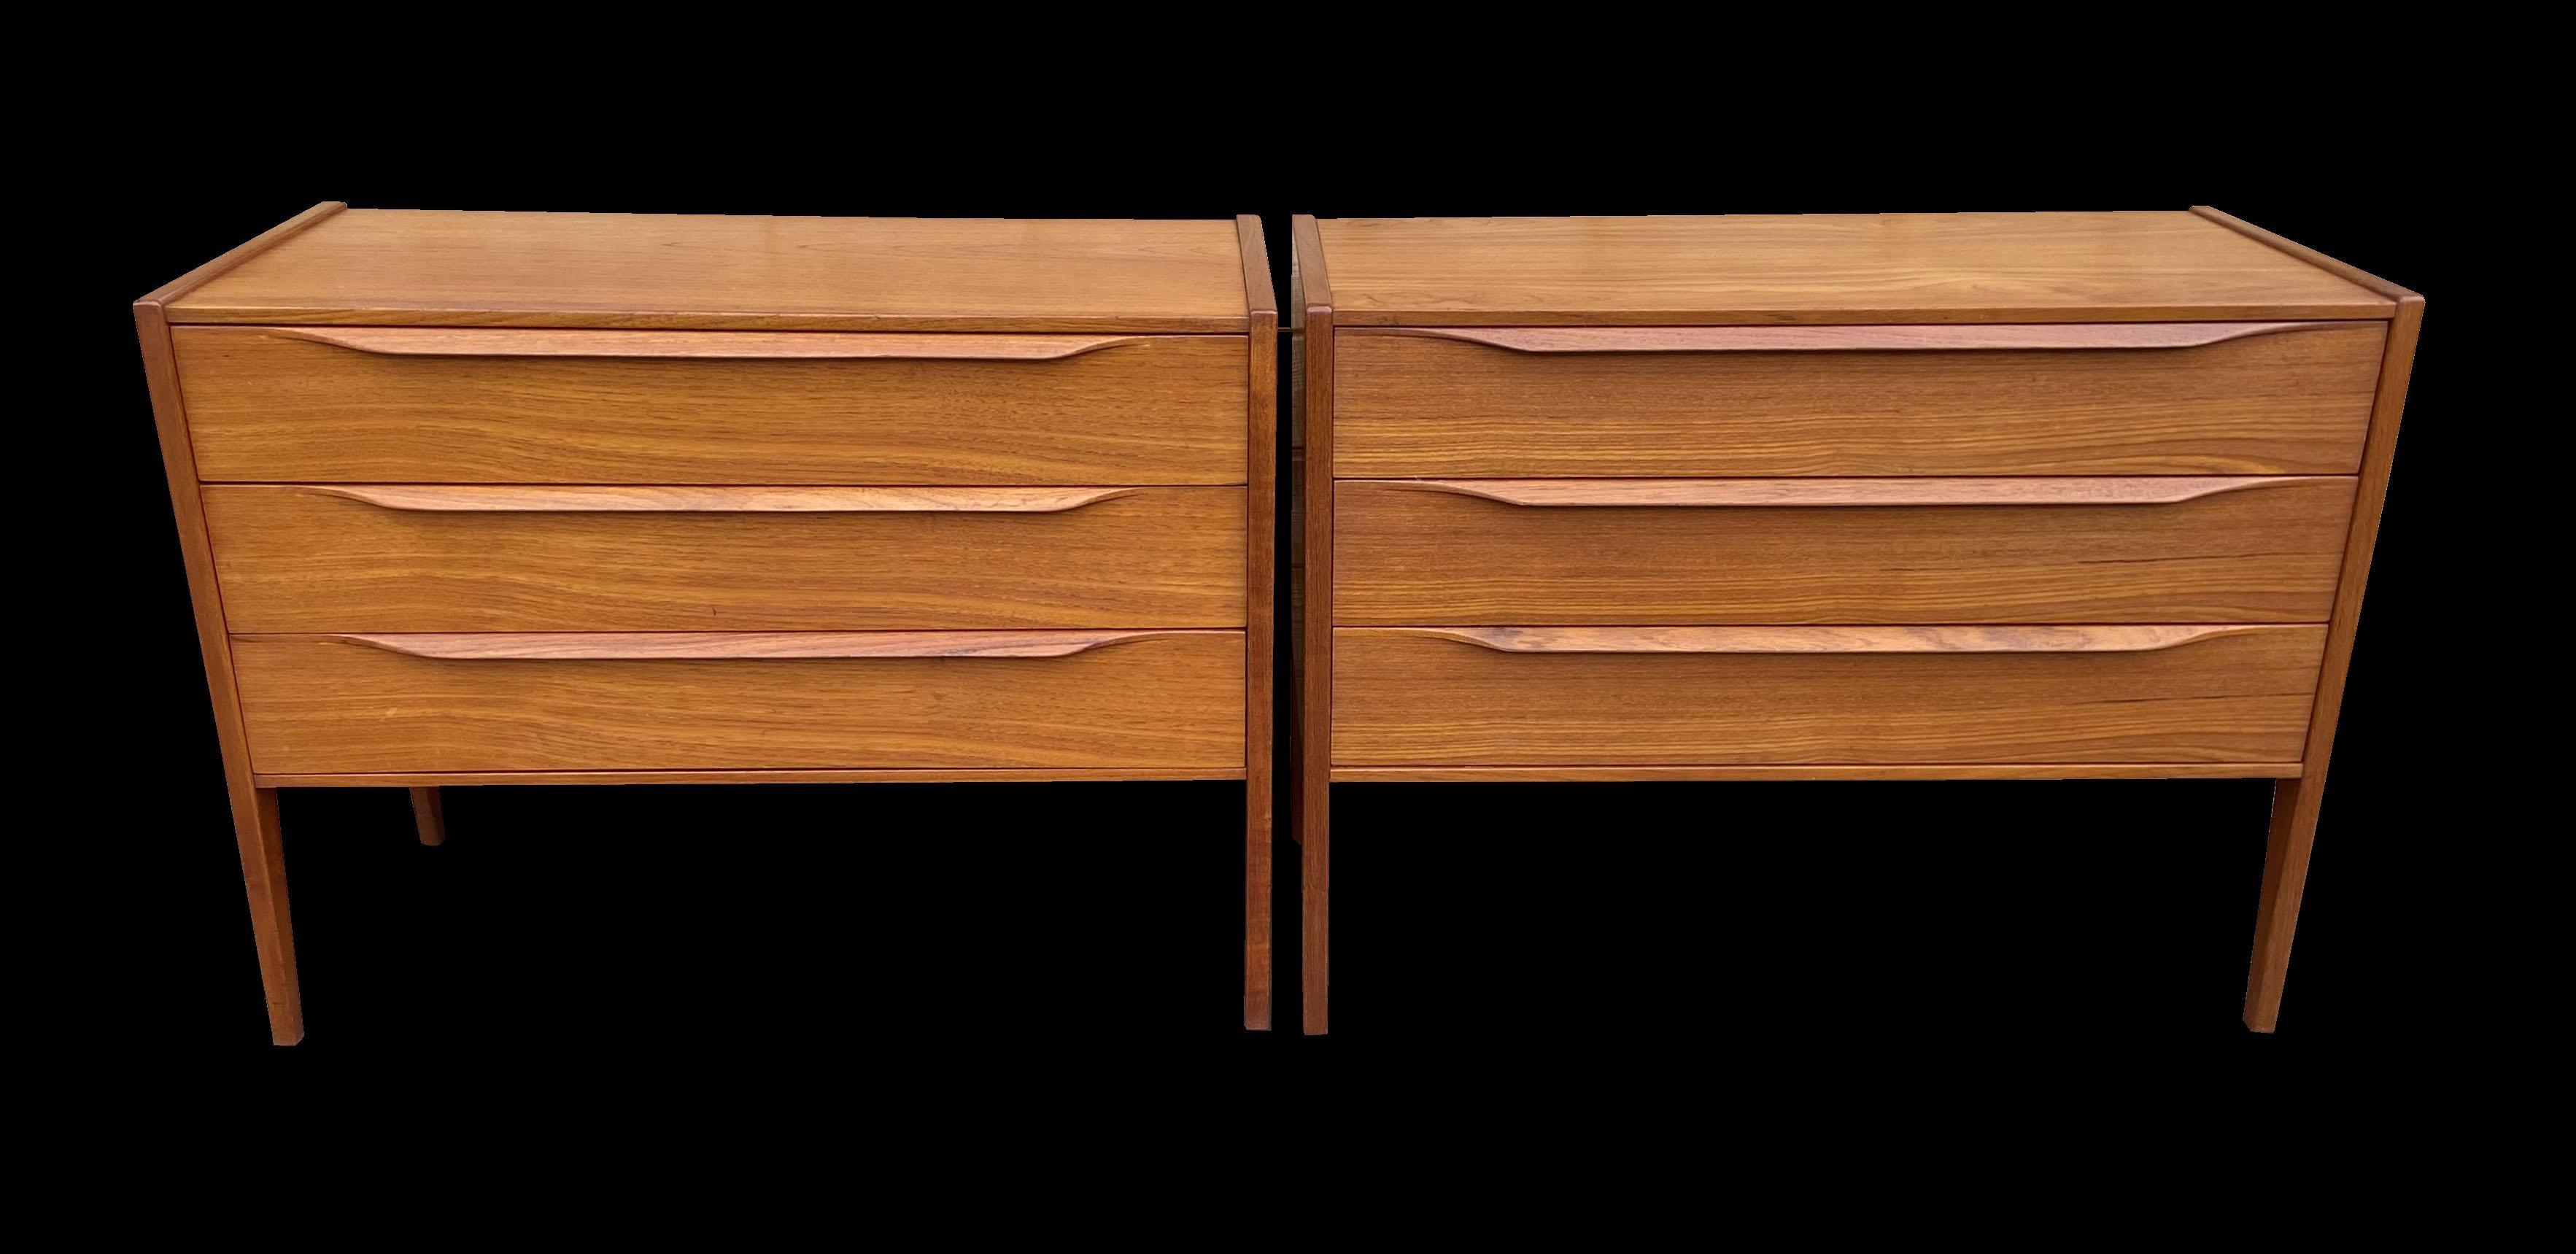 A very nice pair of Teak cabinets in very good condition. One has a sectioned top drawer for jewelry etc. they could be used in any room including as bedside cabinets.